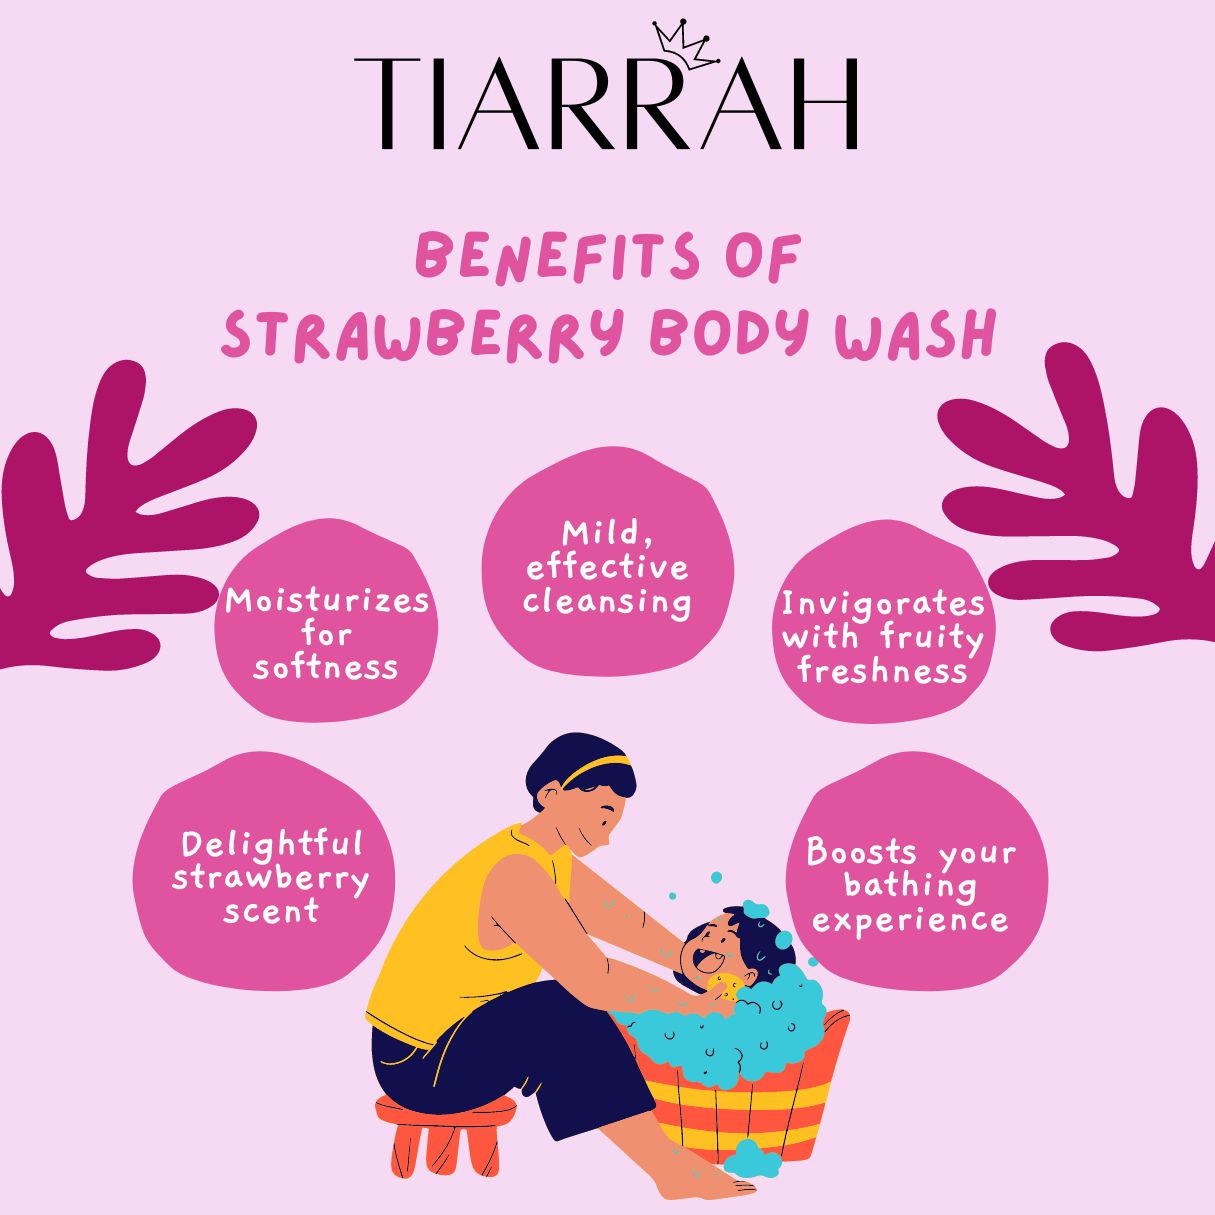 Tiarrah's Strawberry Body Wash: Natural & Non-Toxic - The Luxury Bath and Body Care Shop